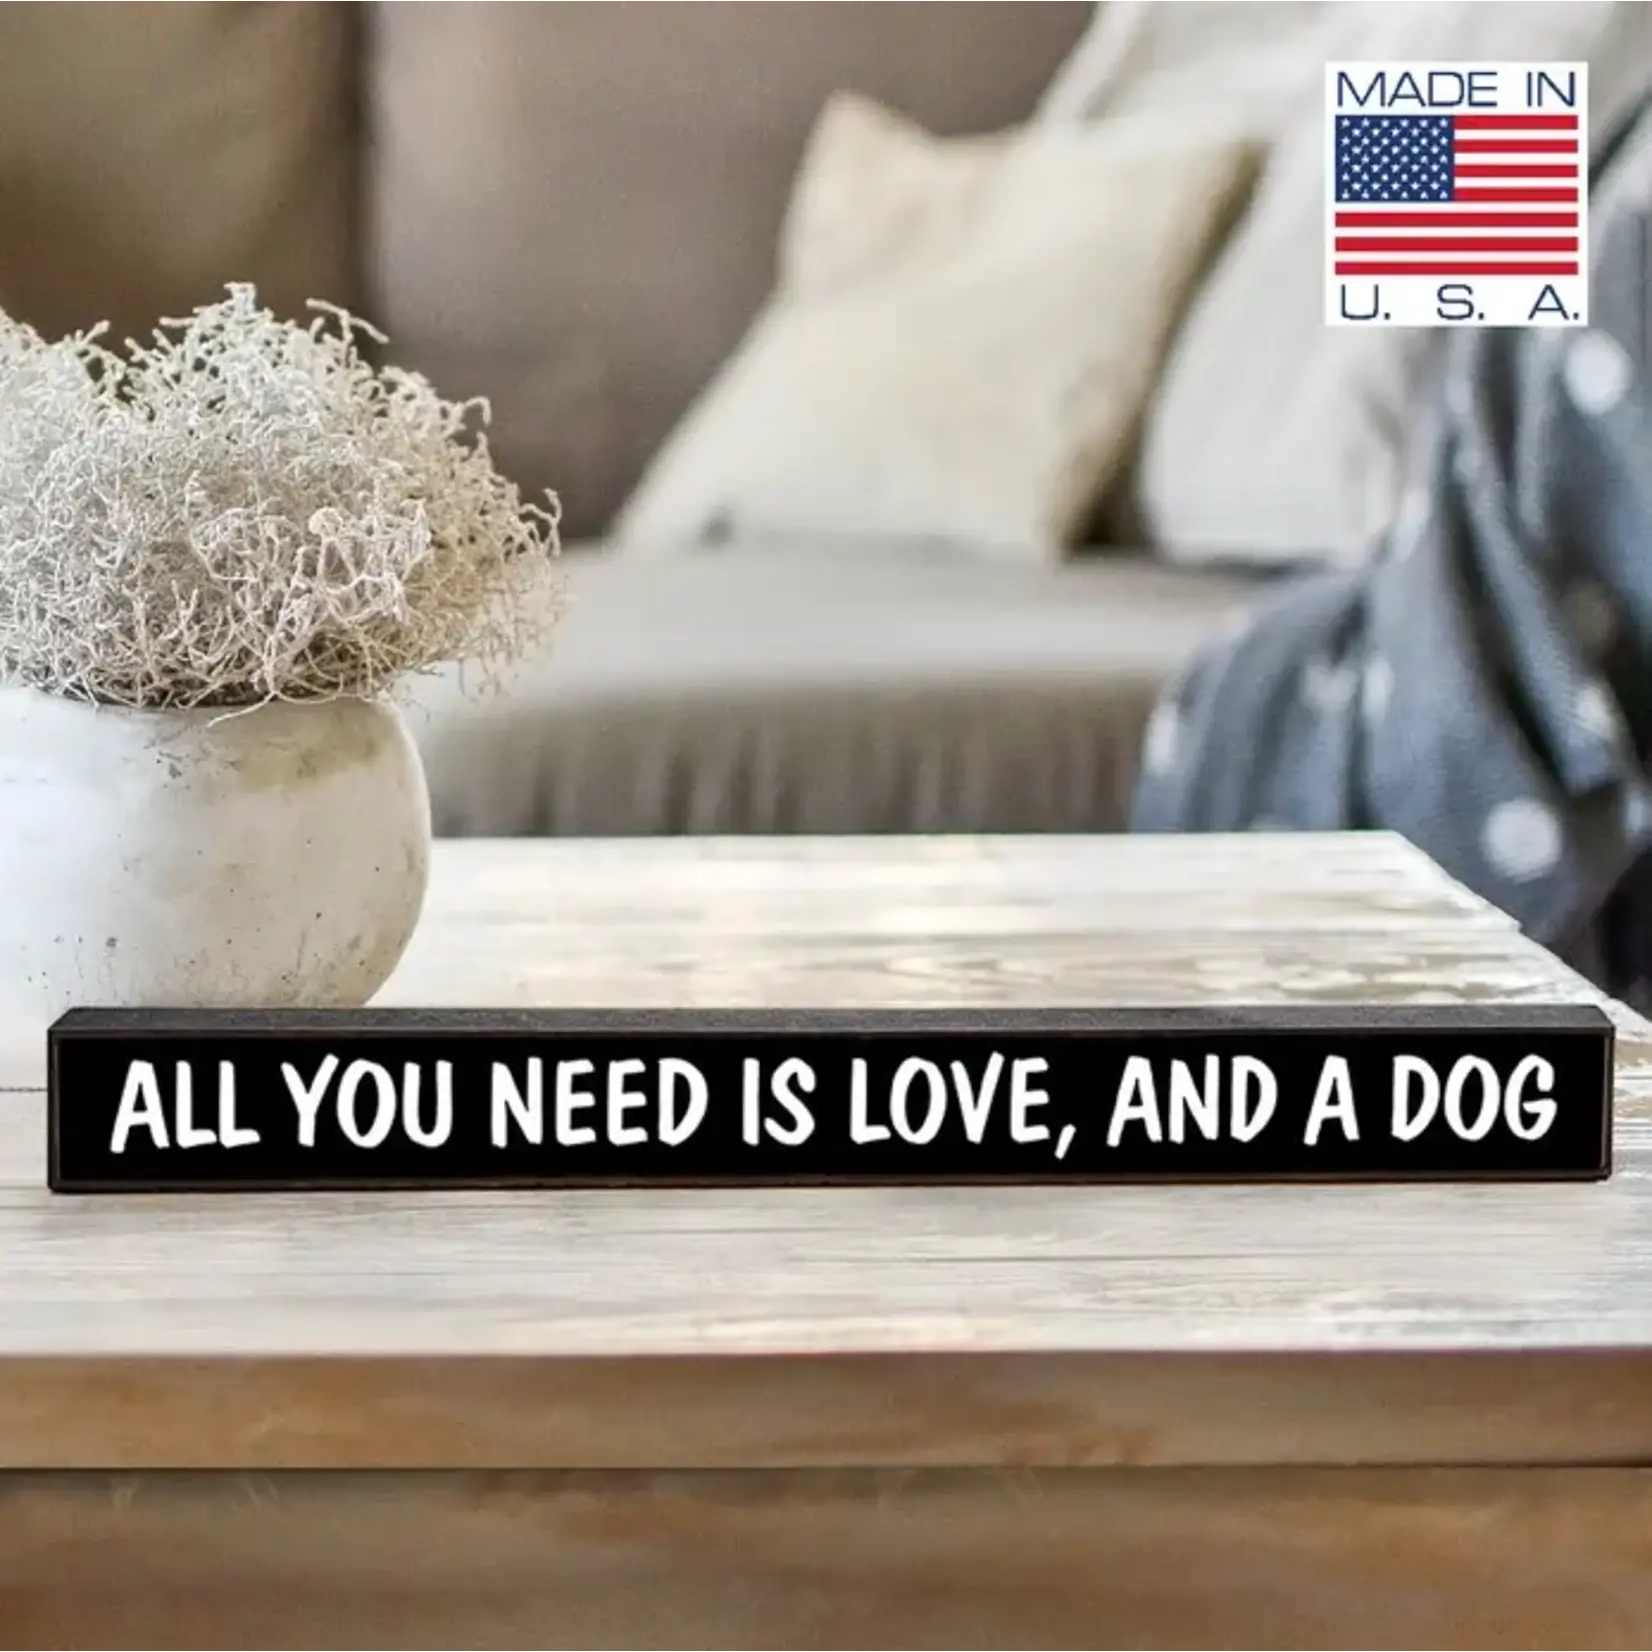 All You Need is Love, and A Dog - Skinnies®